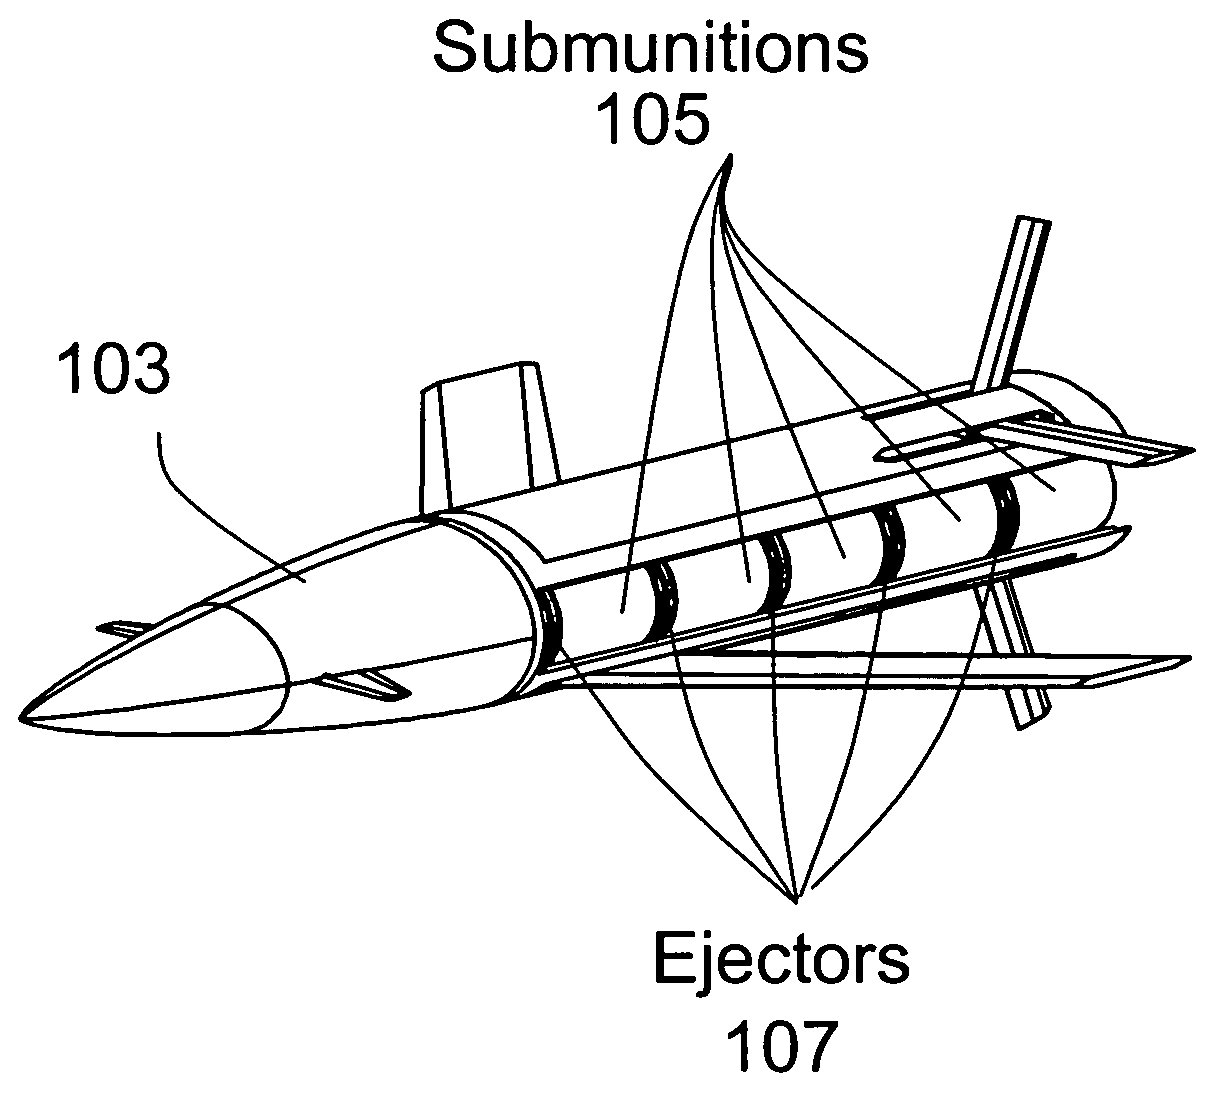 Variable-force payload ejecting system